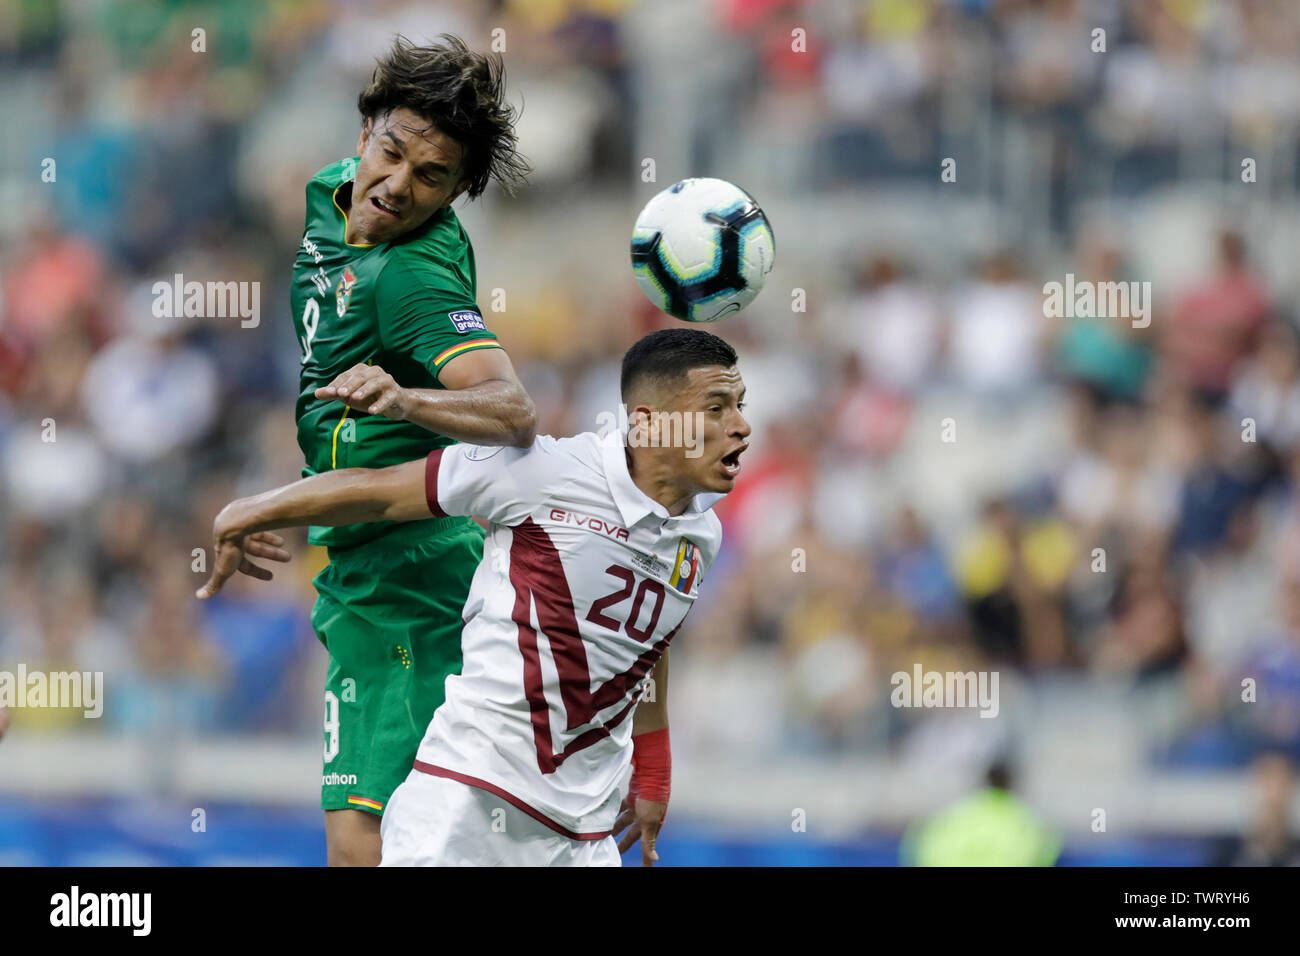 Belo Horizonte, Brazil. 22nd June, 2019. Marcelo Moreno of Bolivia (L) vies with Hernandez Pimentel of Venezuela during the Copa America 2019 soccer match between Venezuela and Bolivia at Mineirao Stadium in Belo Horizonte, Brazil, June 22, 2019. Credit: Lucio Tavora/Xinhua/Alamy Live News Stock Photo